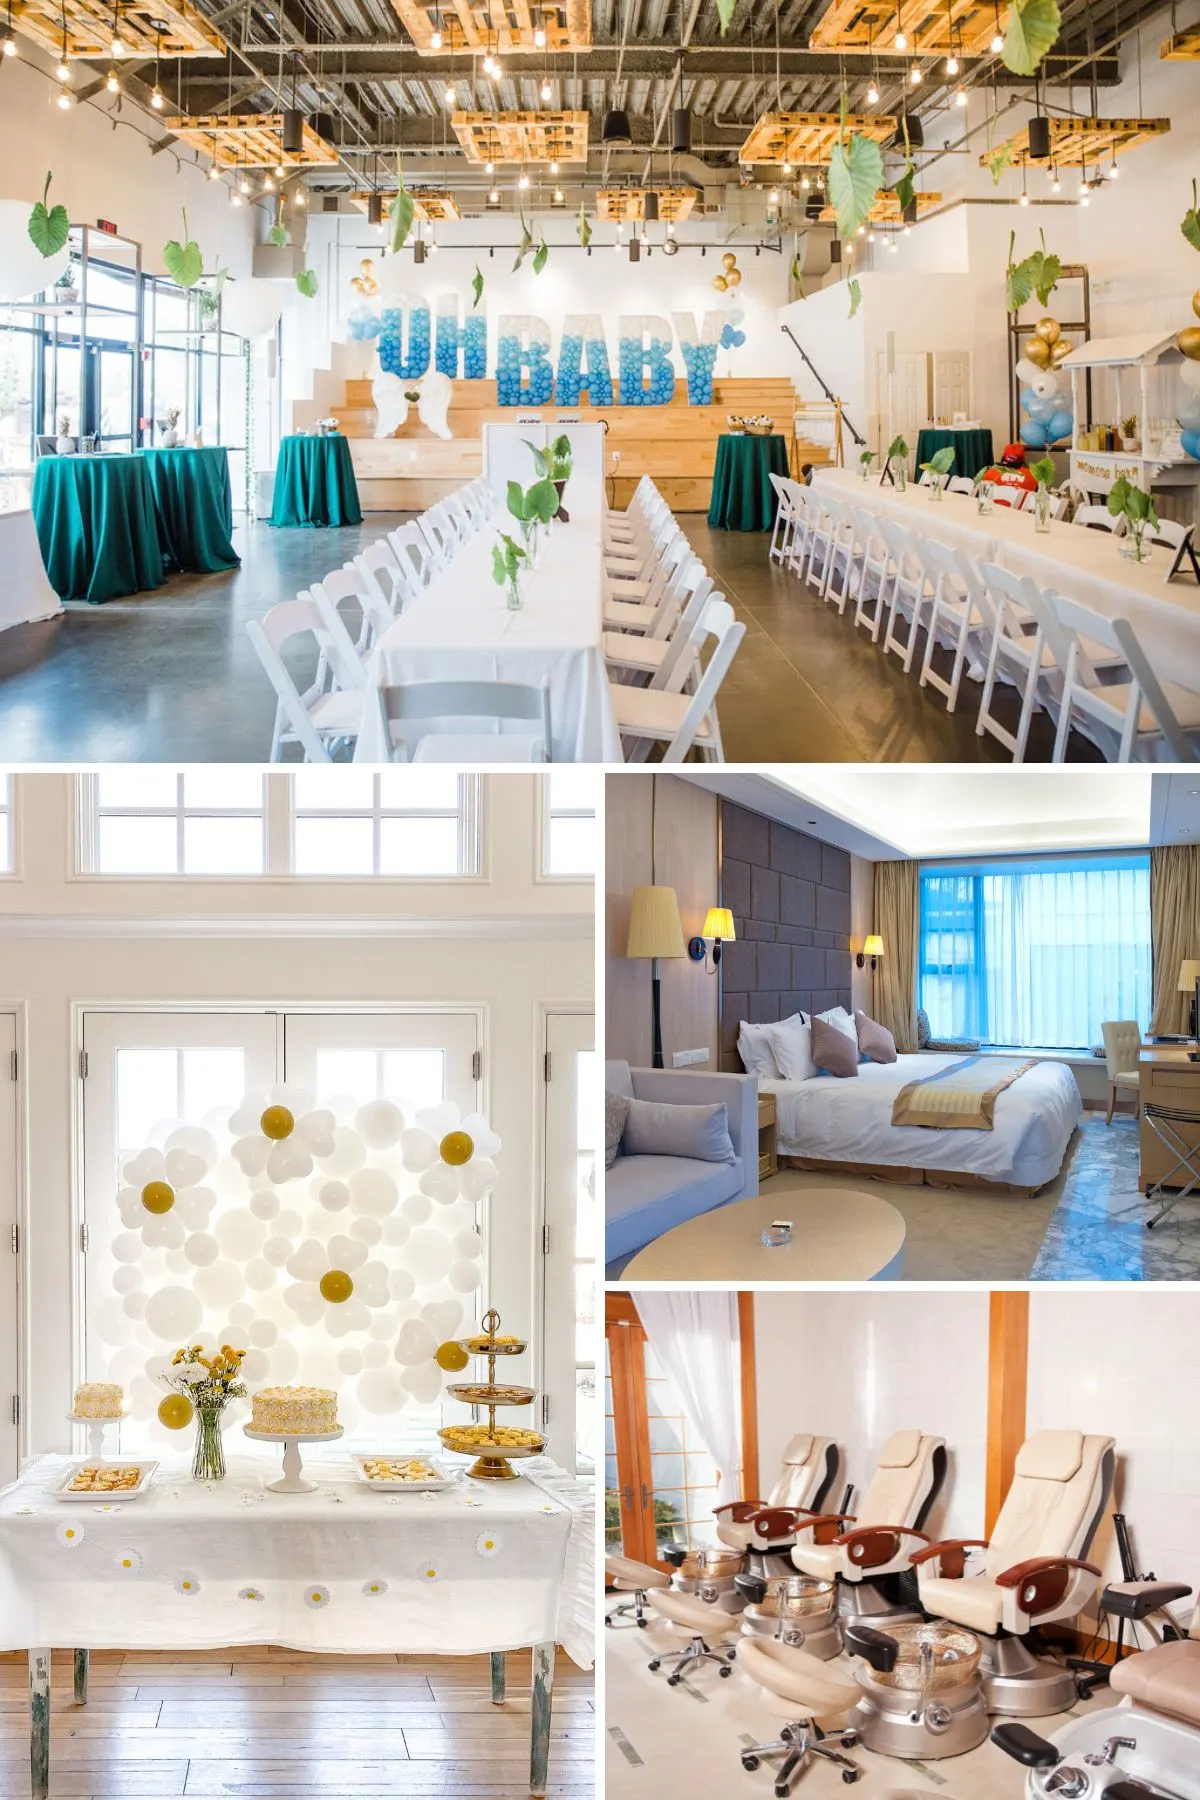 Collage of indoor baby shower venues including a banquet hall, home, hotel room, and nail salon.